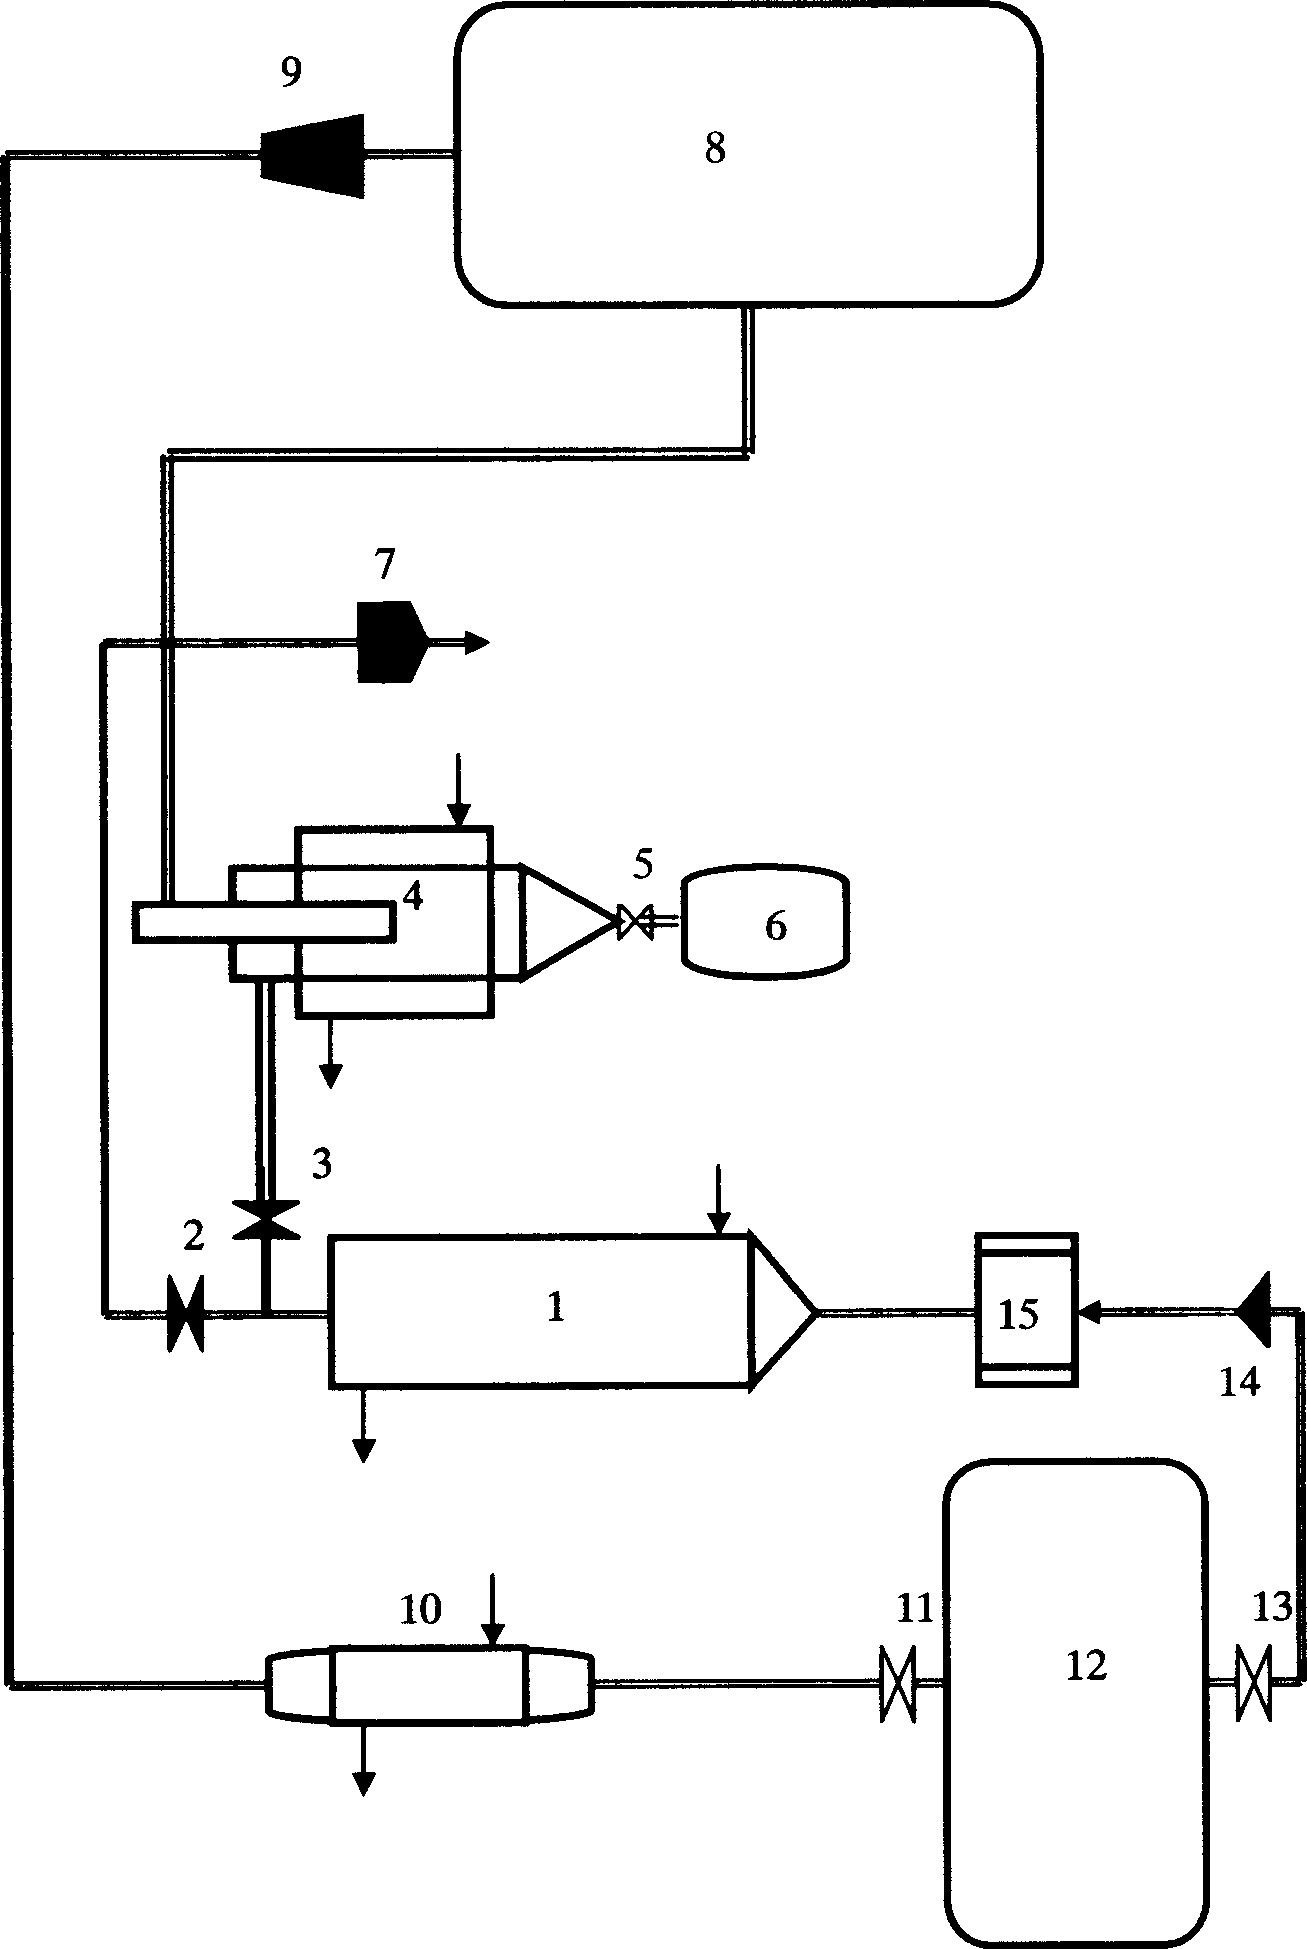 Process for extracting oil